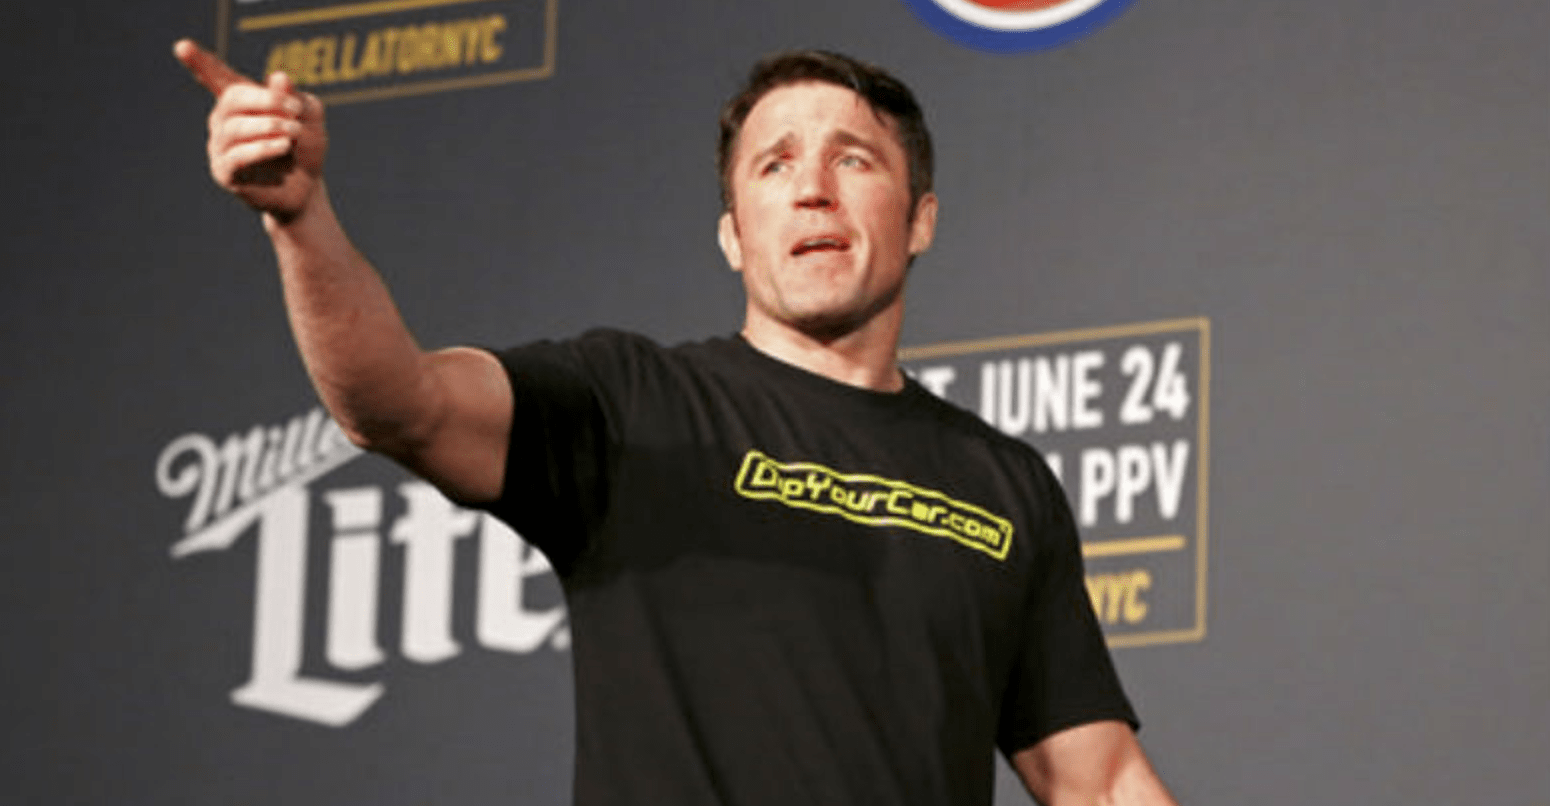 The MMA World Reacts To Chael Sonnen’s Retirement